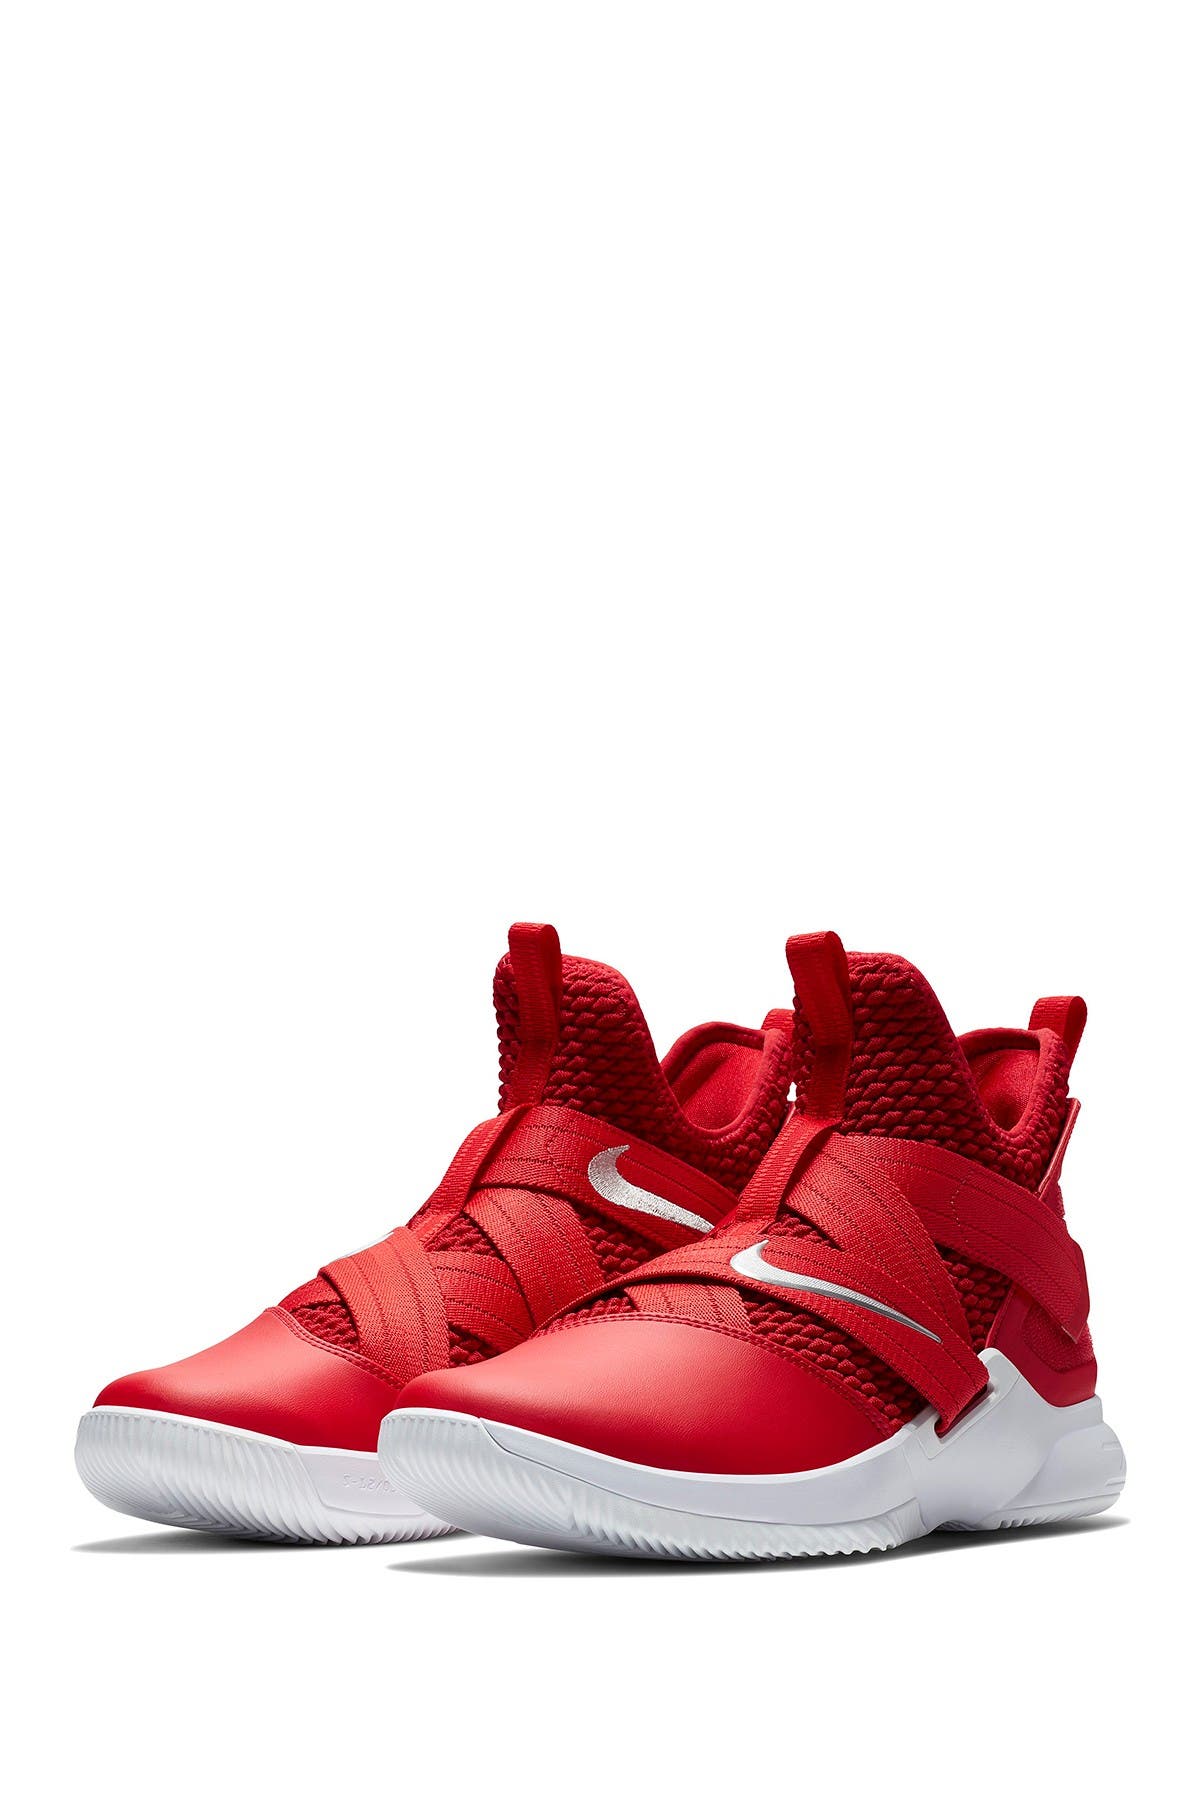 nike zoom lebron soldier xii tb basketball shoes